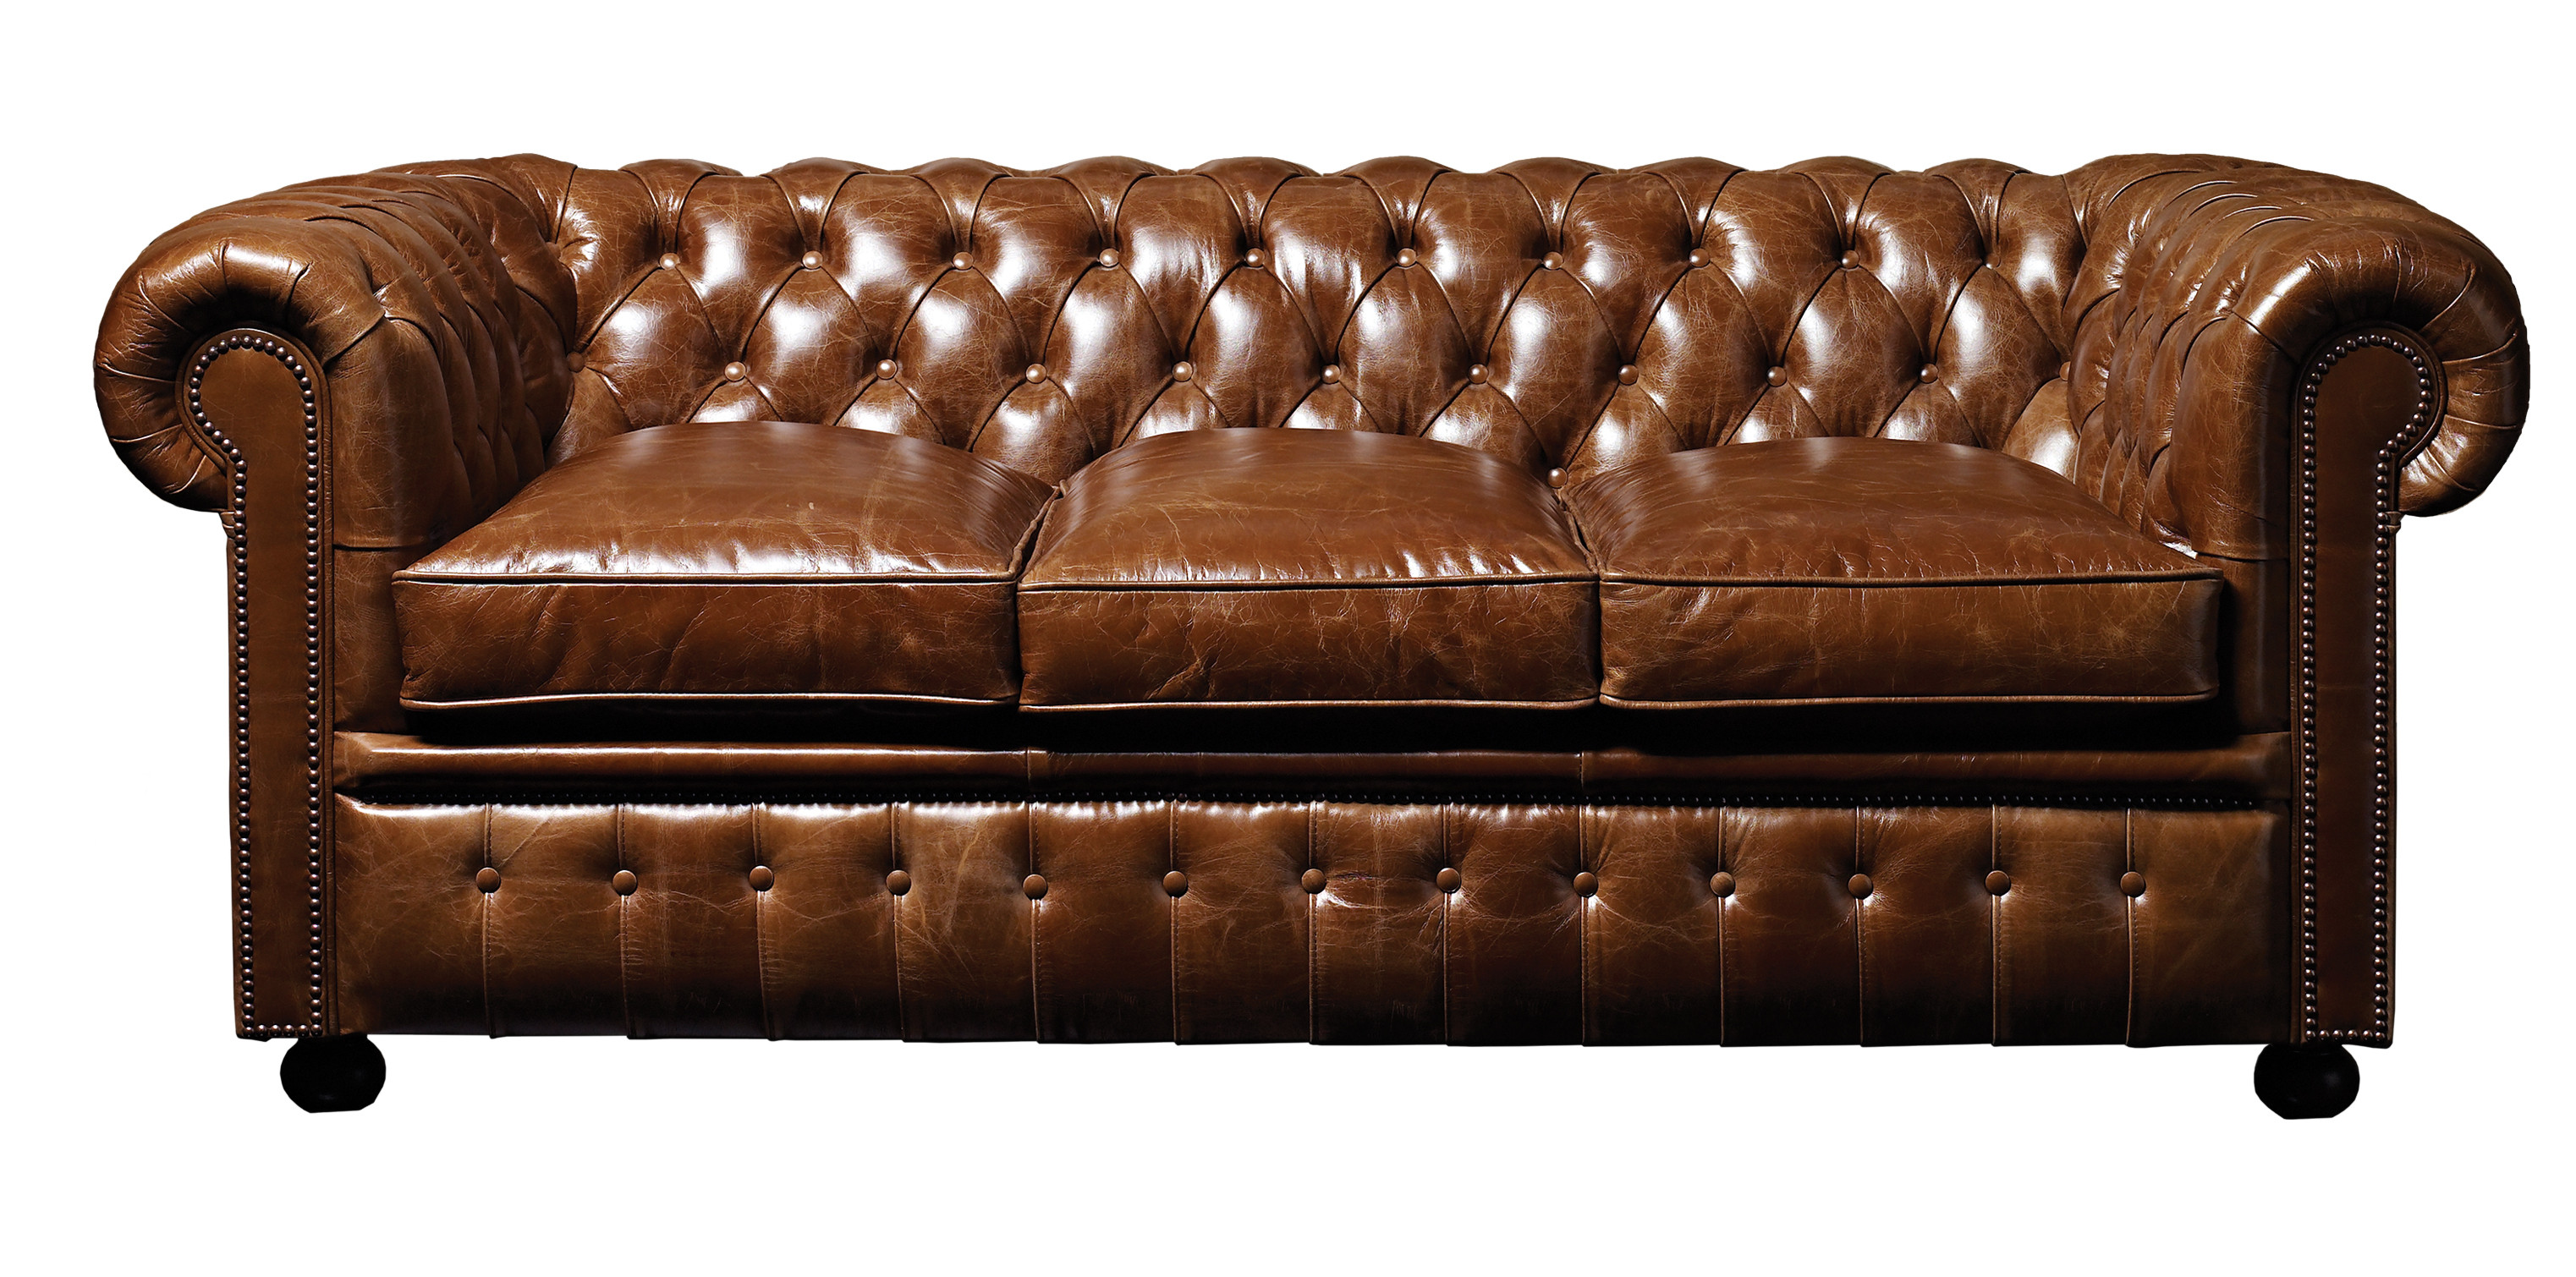 Sofa Chesterfield
 Design Classics 20 The Chesterfield Sofa Mad About The